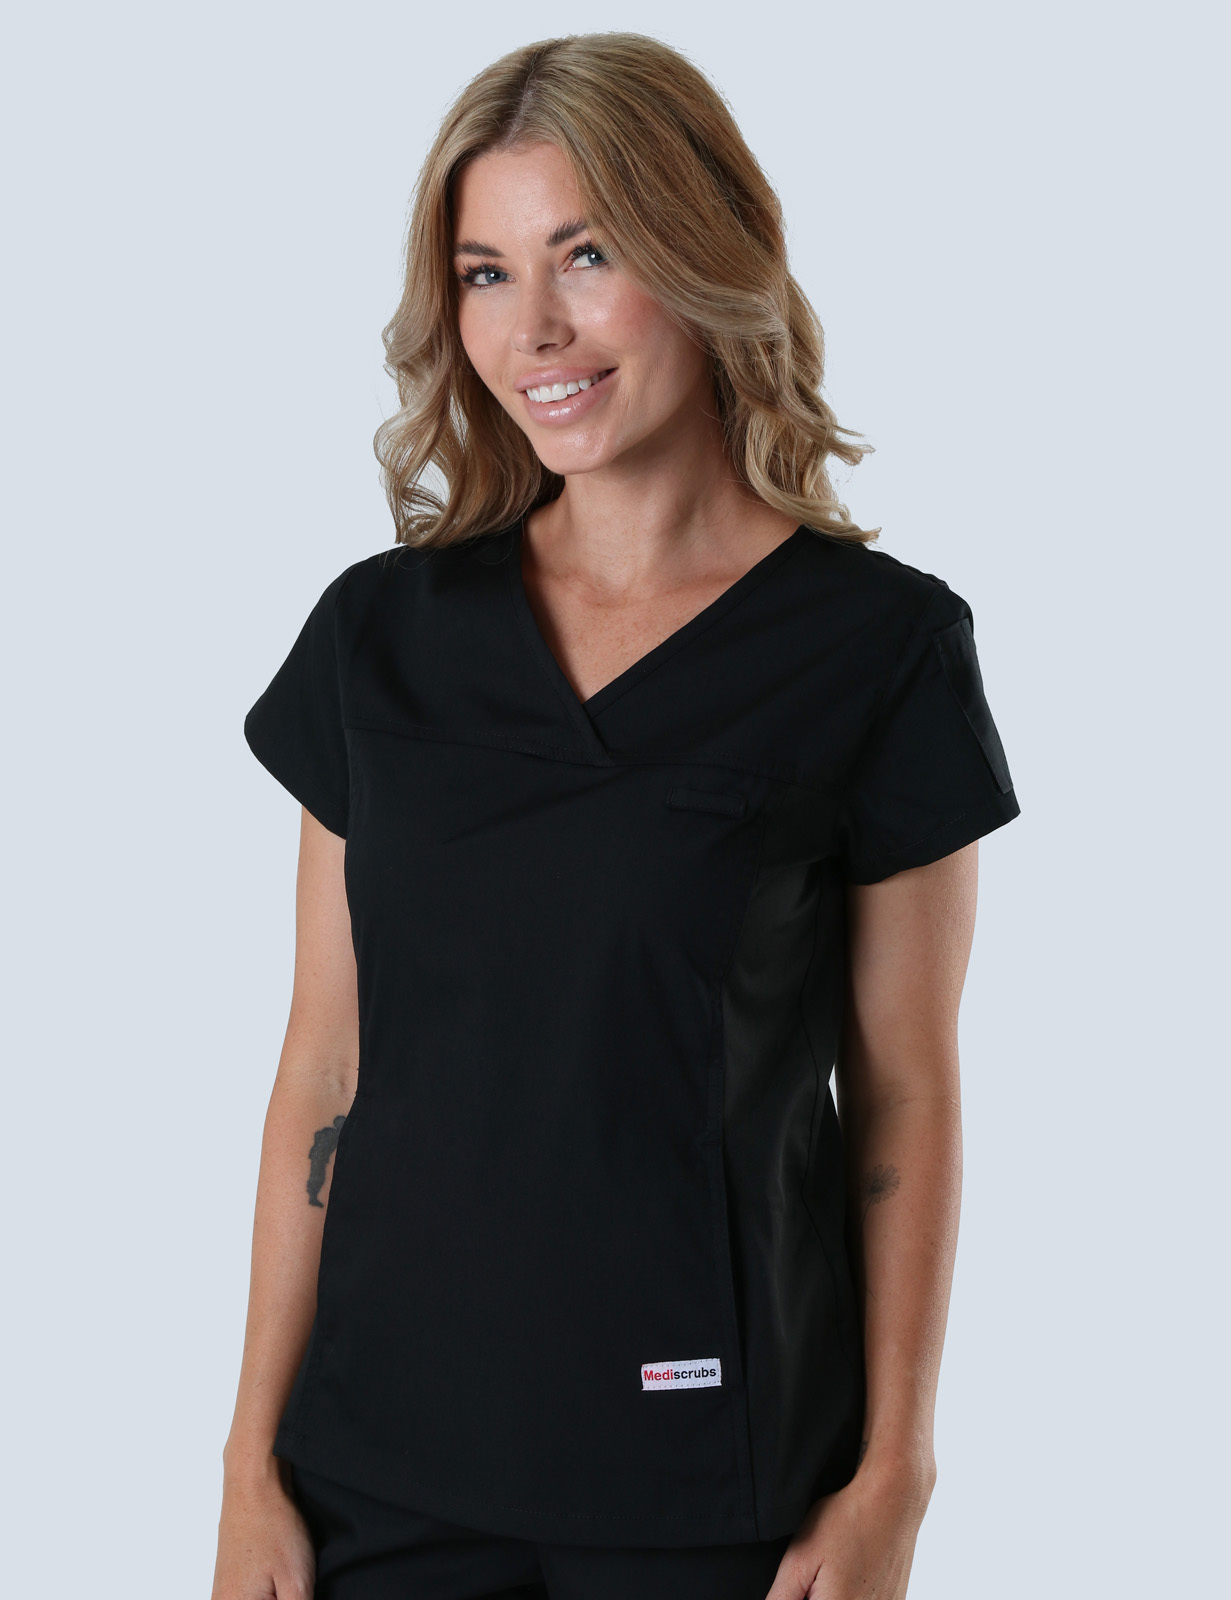 Women's Fit Solid Scrub Top With Spandex Panel - Black - 3X Large